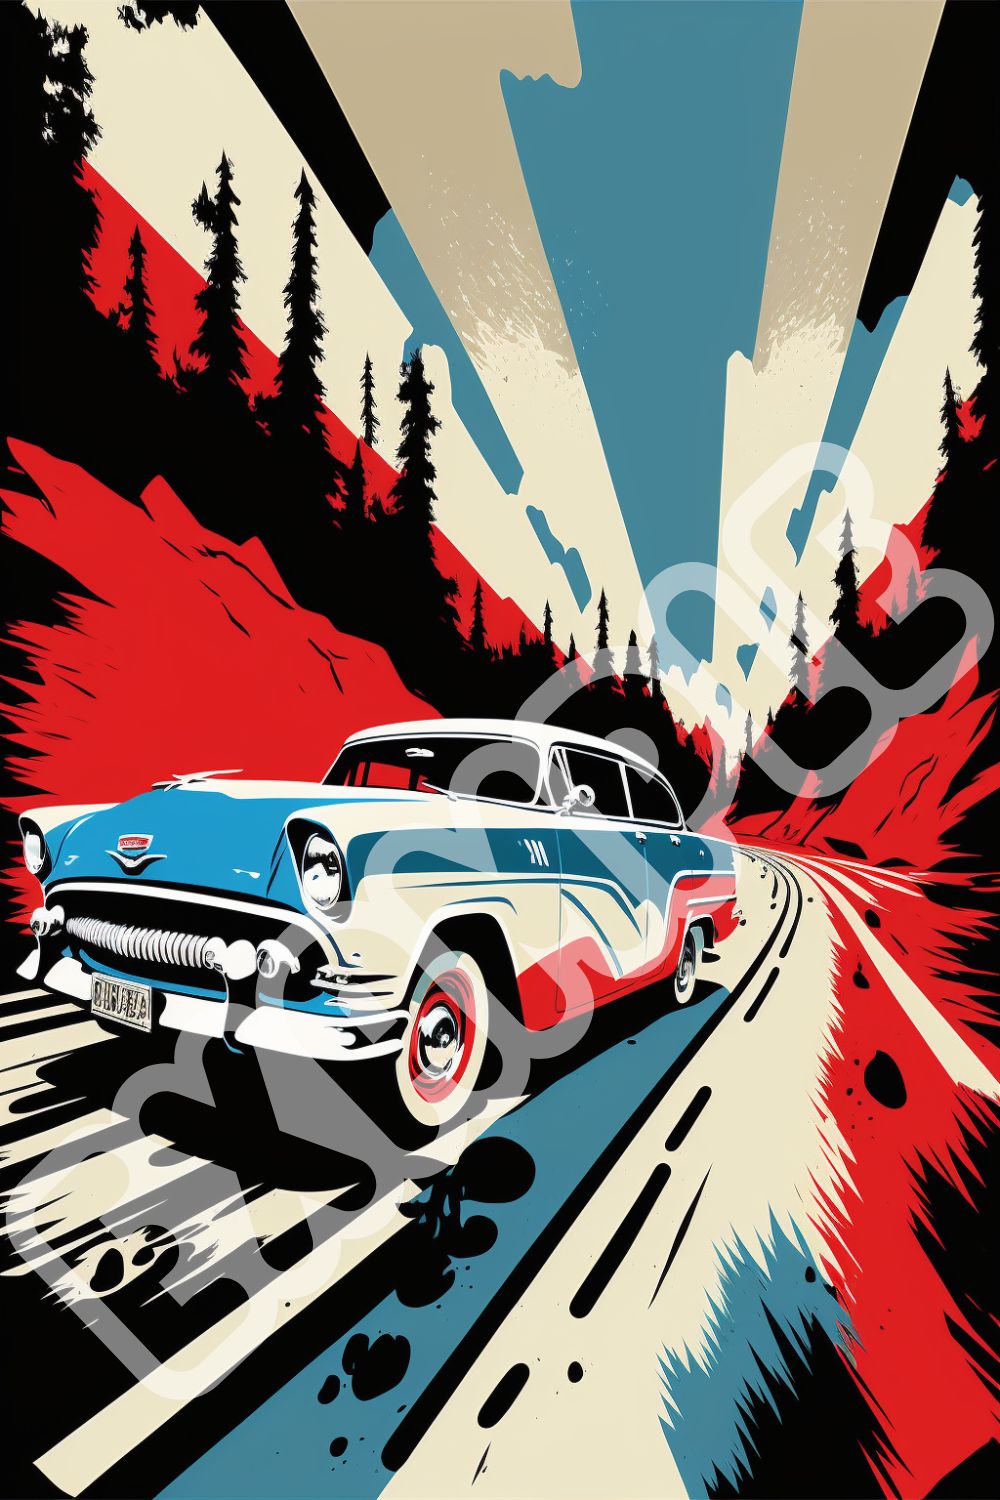 10 Vintage Cars Posters for Room/Office cover image.